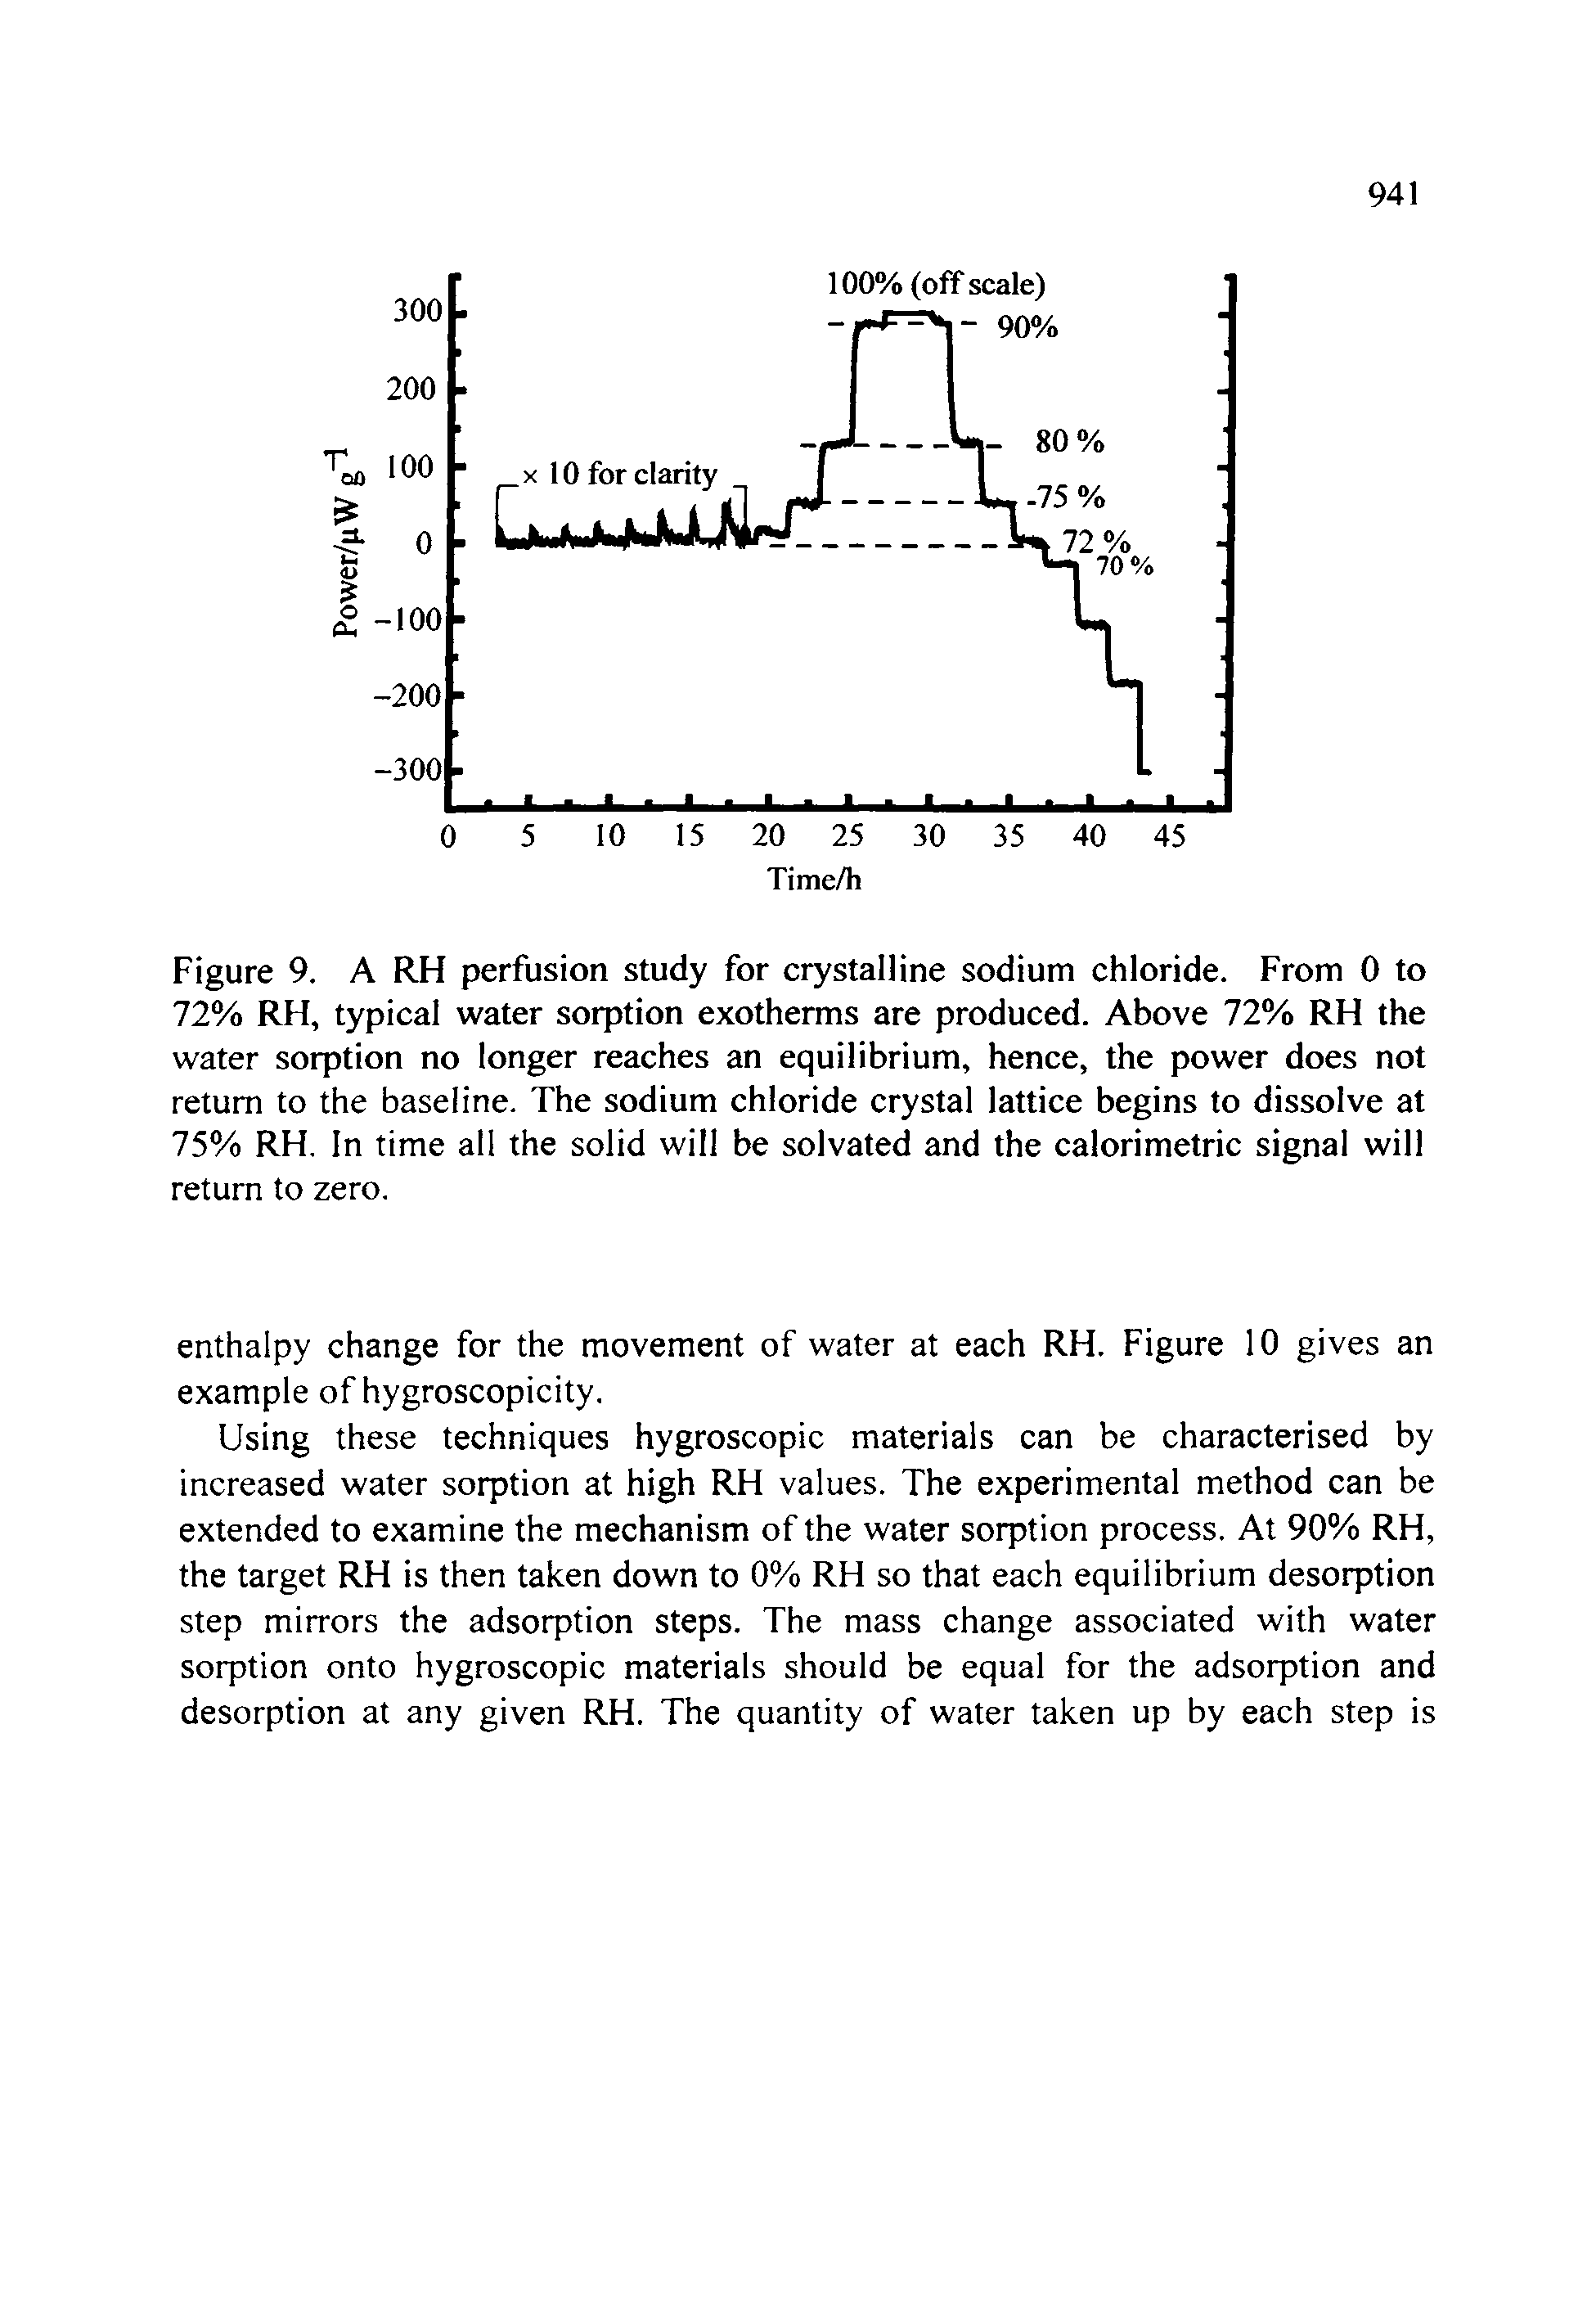 Figure 9. A RH perfusion study for crystalline sodium chloride. From 0 to 72% RH, typical water sorption exotherms are produced. Above 72% RH the water sorption no longer reaches an equilibrium, hence, the power does not return to the baseline. The sodium chloride crystal lattice begins to dissolve at 75% RH. In time all the solid will be solvated and the calorimetric signal will return to zero.